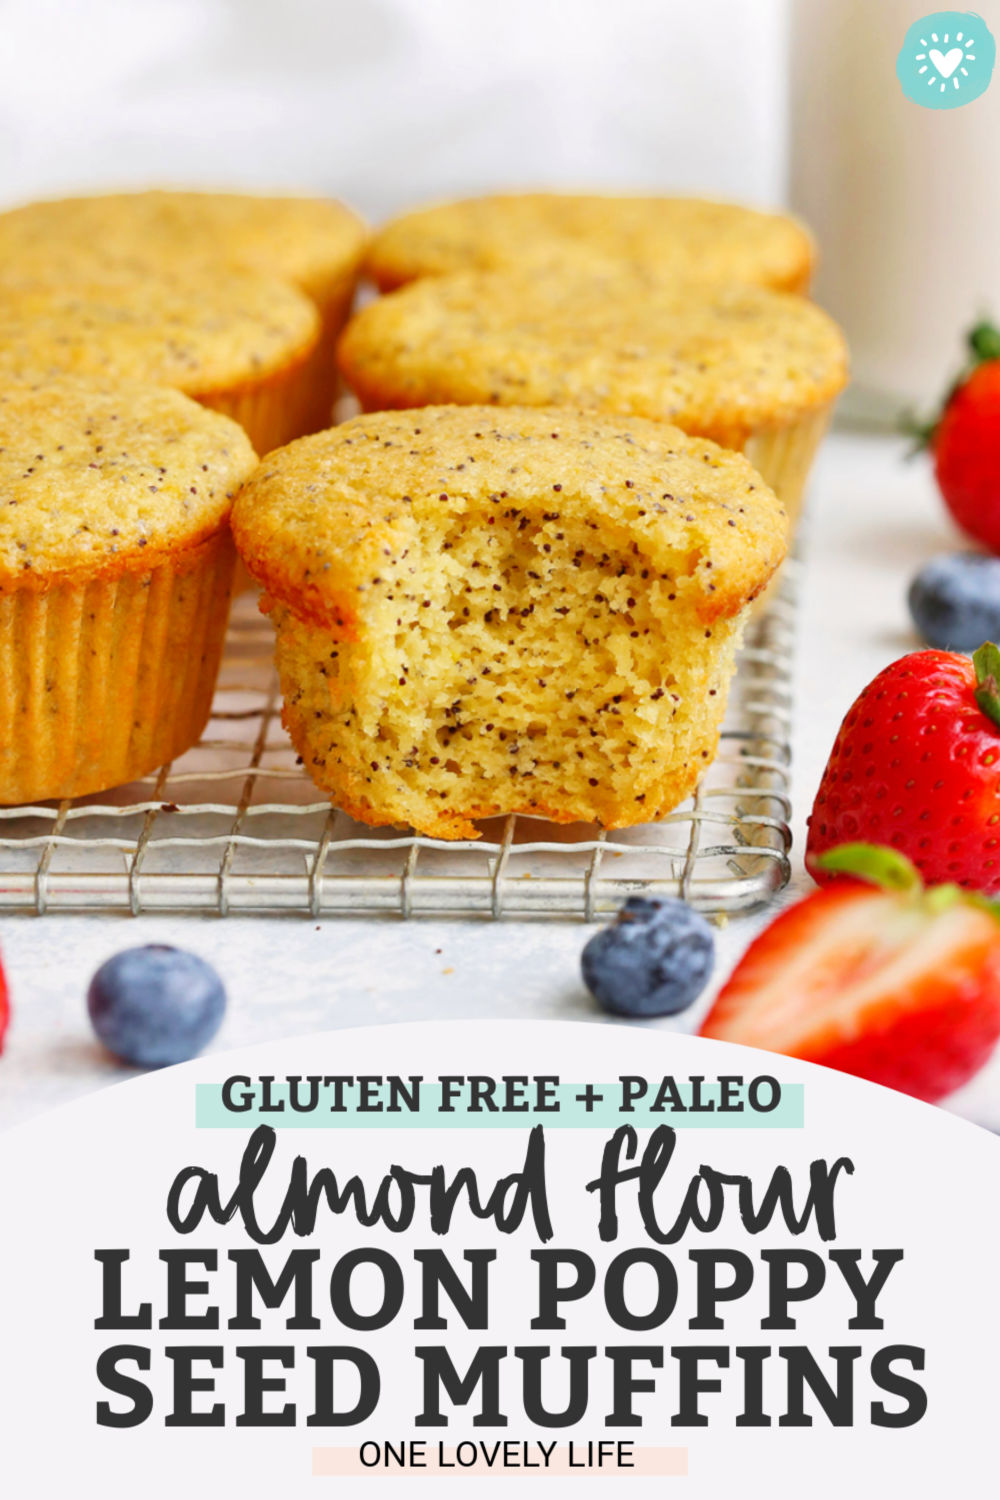 Almond Flour Lemon Poppy Seed Muffins - These gluten-free lemon poppy seed muffins have a light, fluffy texture and are BURSTING with lemon flavor. They're the perfect yummy breakfast or snack! // Paleo Lemon Poppy Seed Muffins // Gluten Free Lemon Poppy Seed Muffins #muffins #almondflour #lemon #poppyseed #paleo #glutenfree